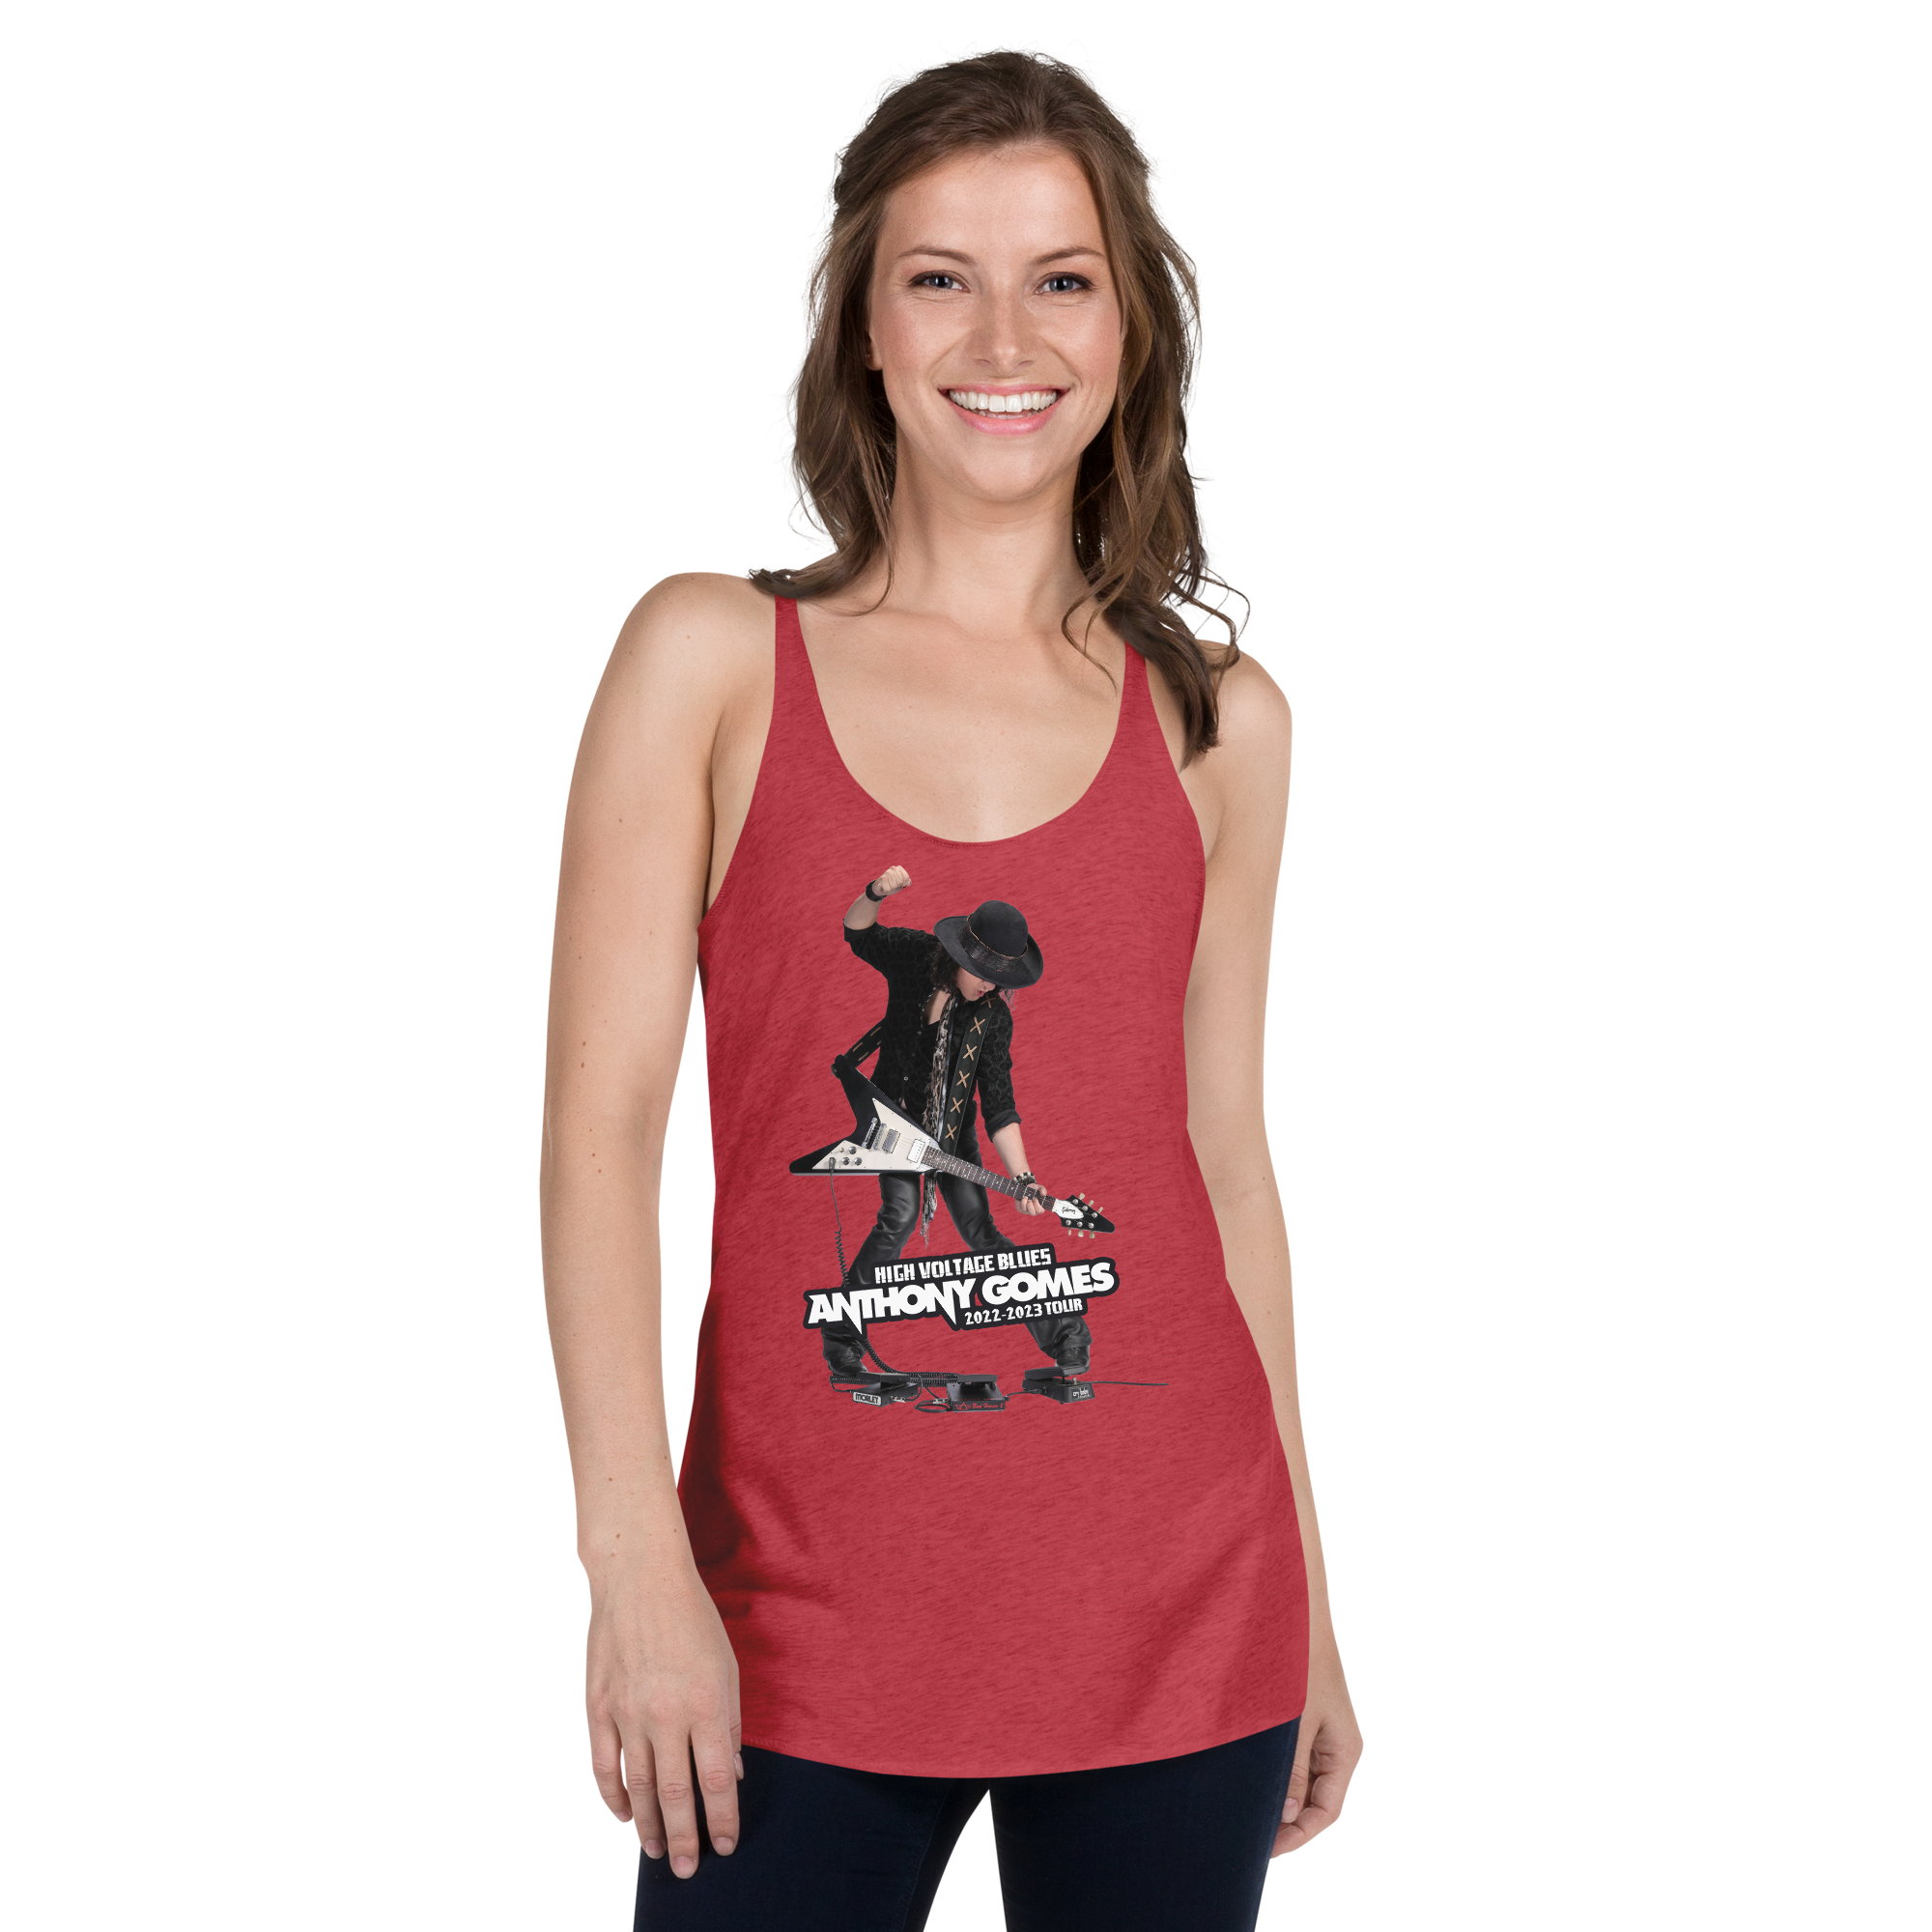 HVB Women's Racerback Tank (Available in 4 Colors)